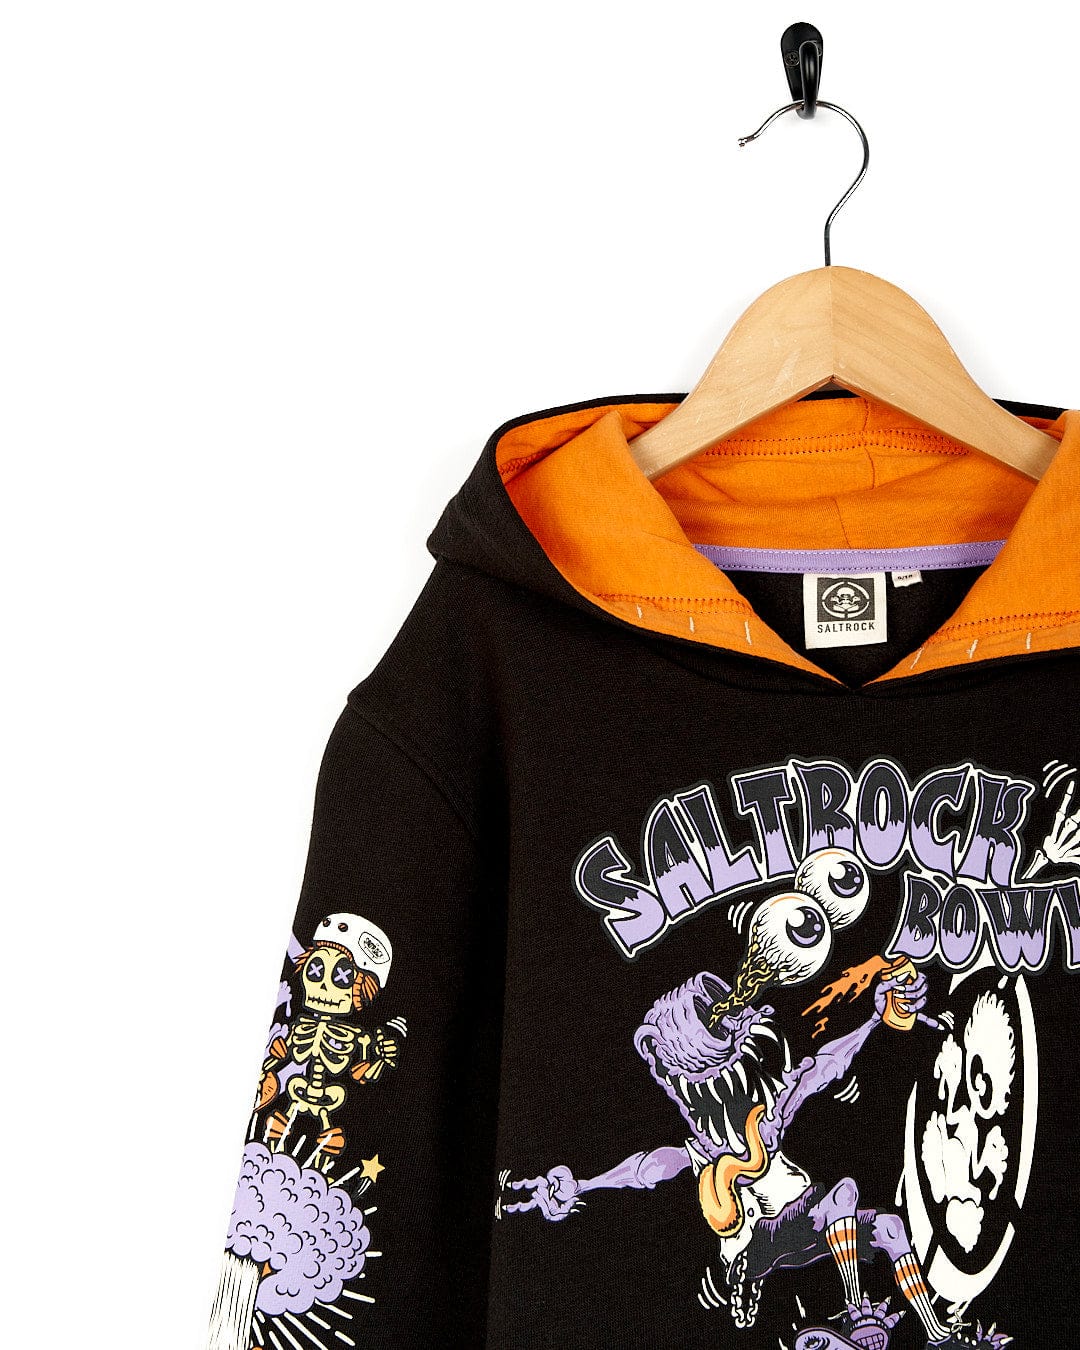 A Saltrock black and orange hoodie with cartoon characters on it.